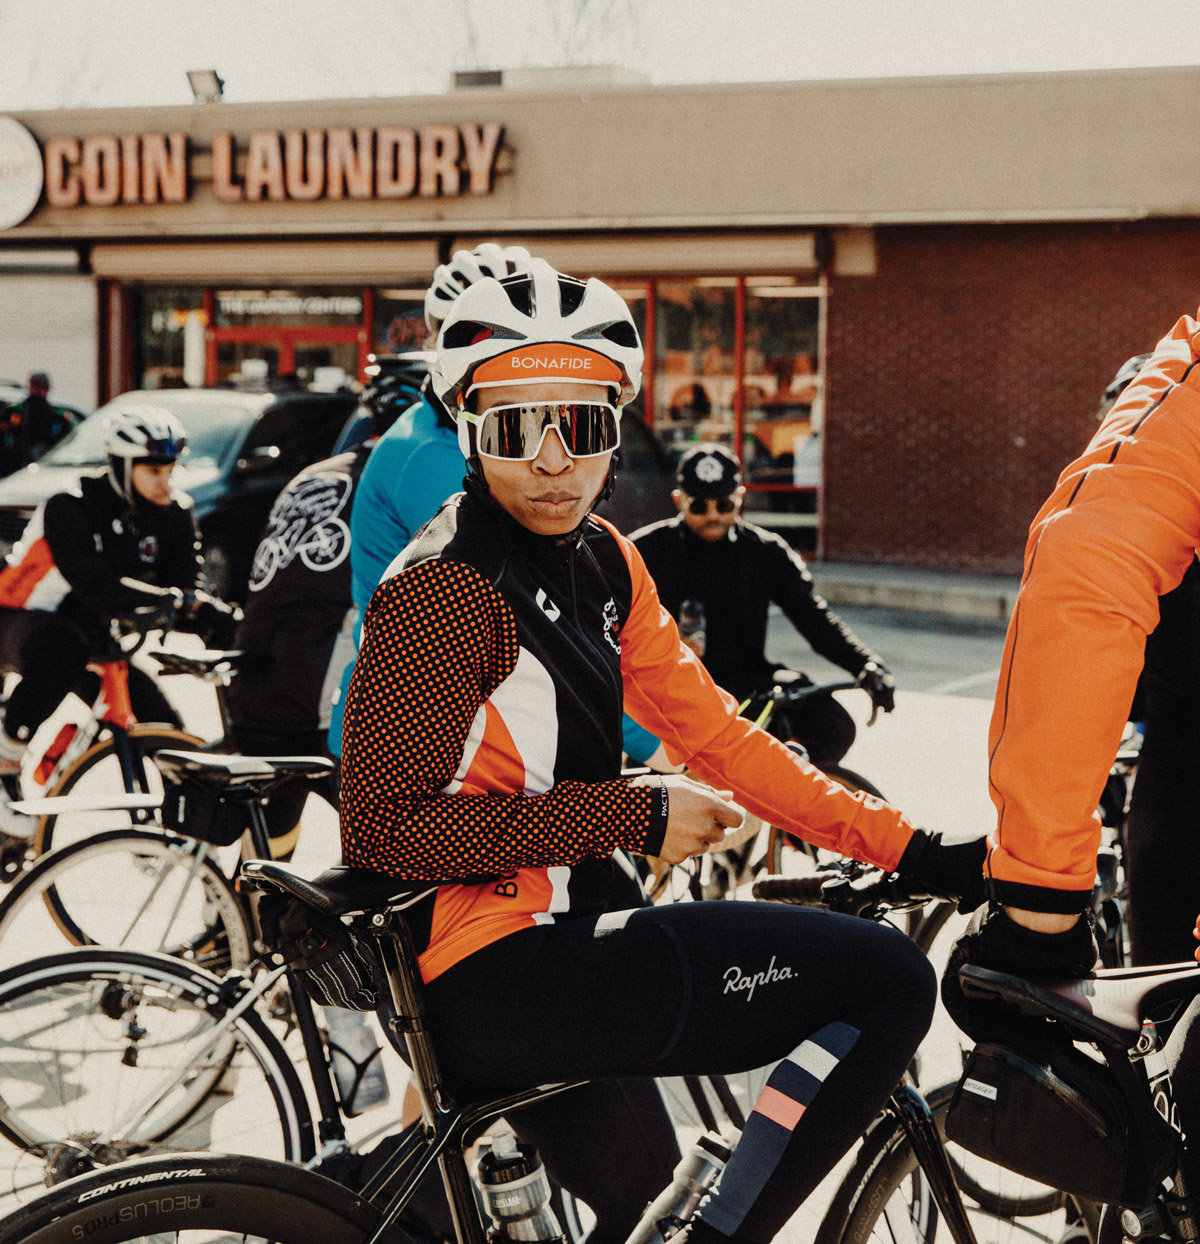 Black cycling clubs are cranking Atlanta’s two-wheeled revolution